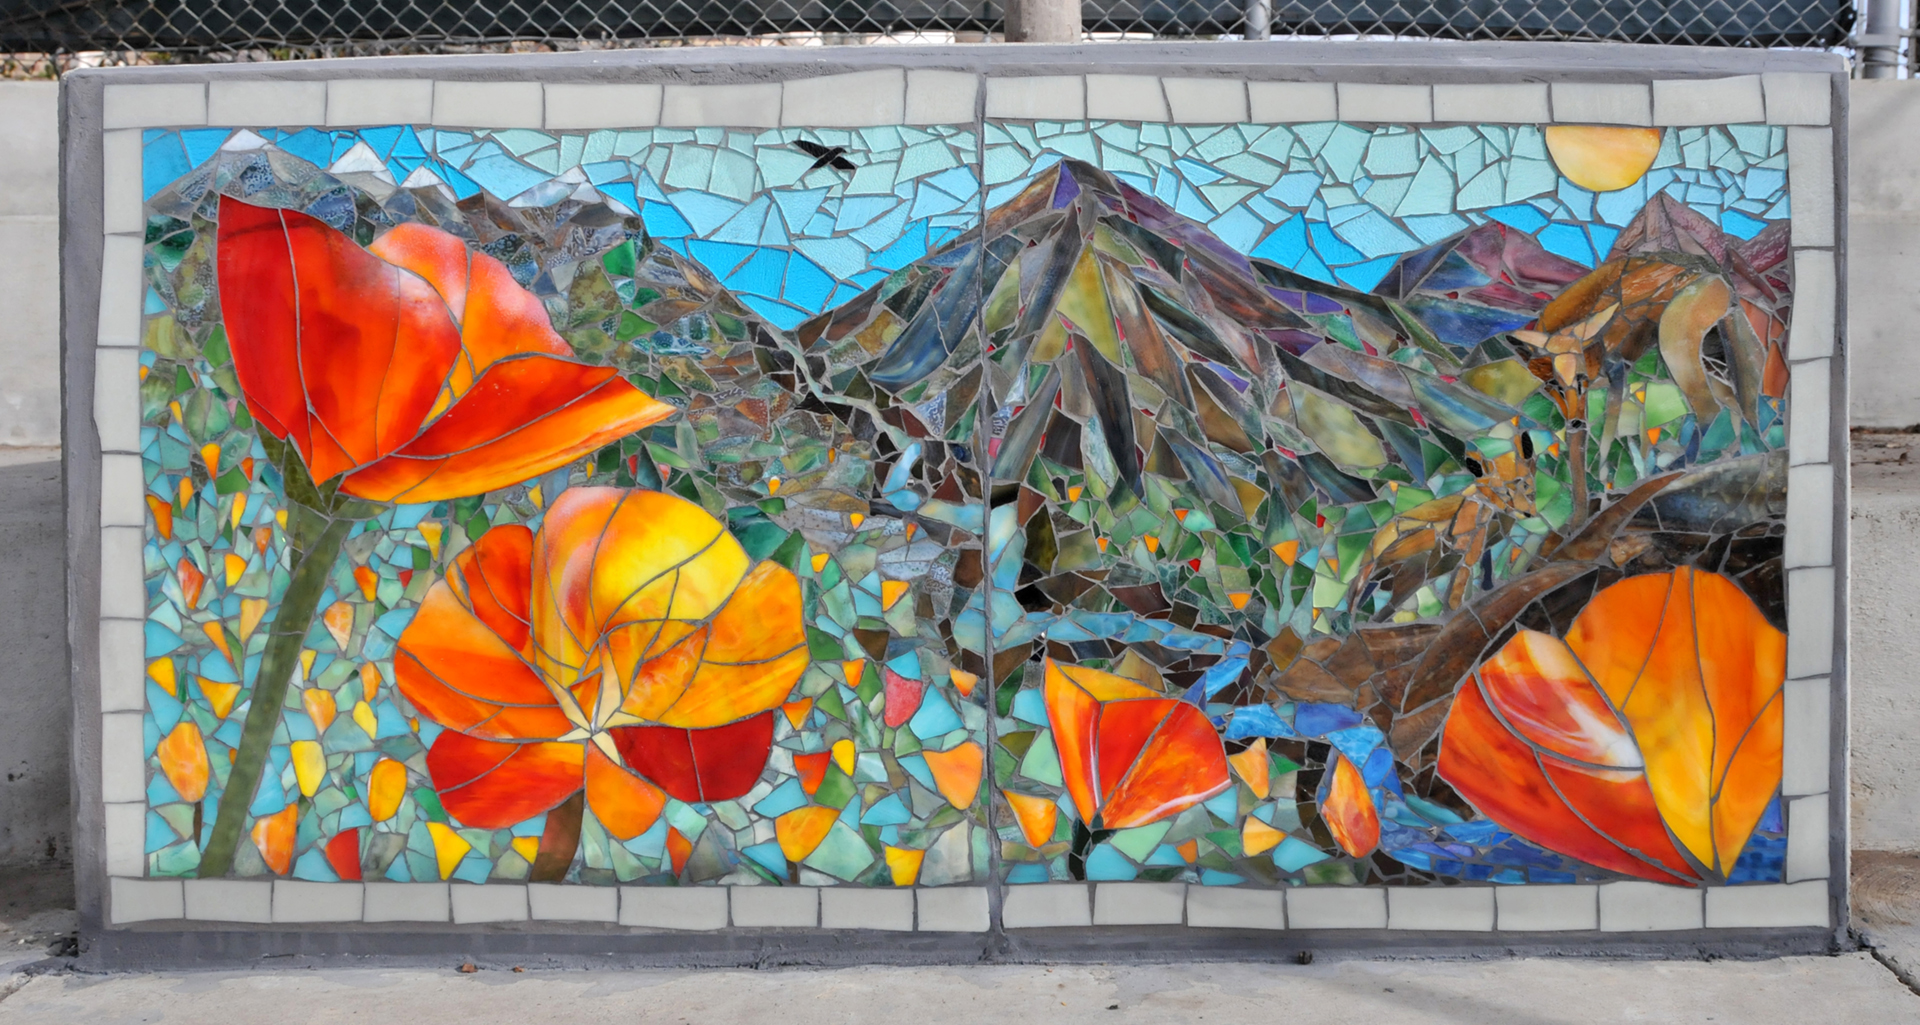 Mosaic showing poppies in the chaparral landscape with coyotes and a stream